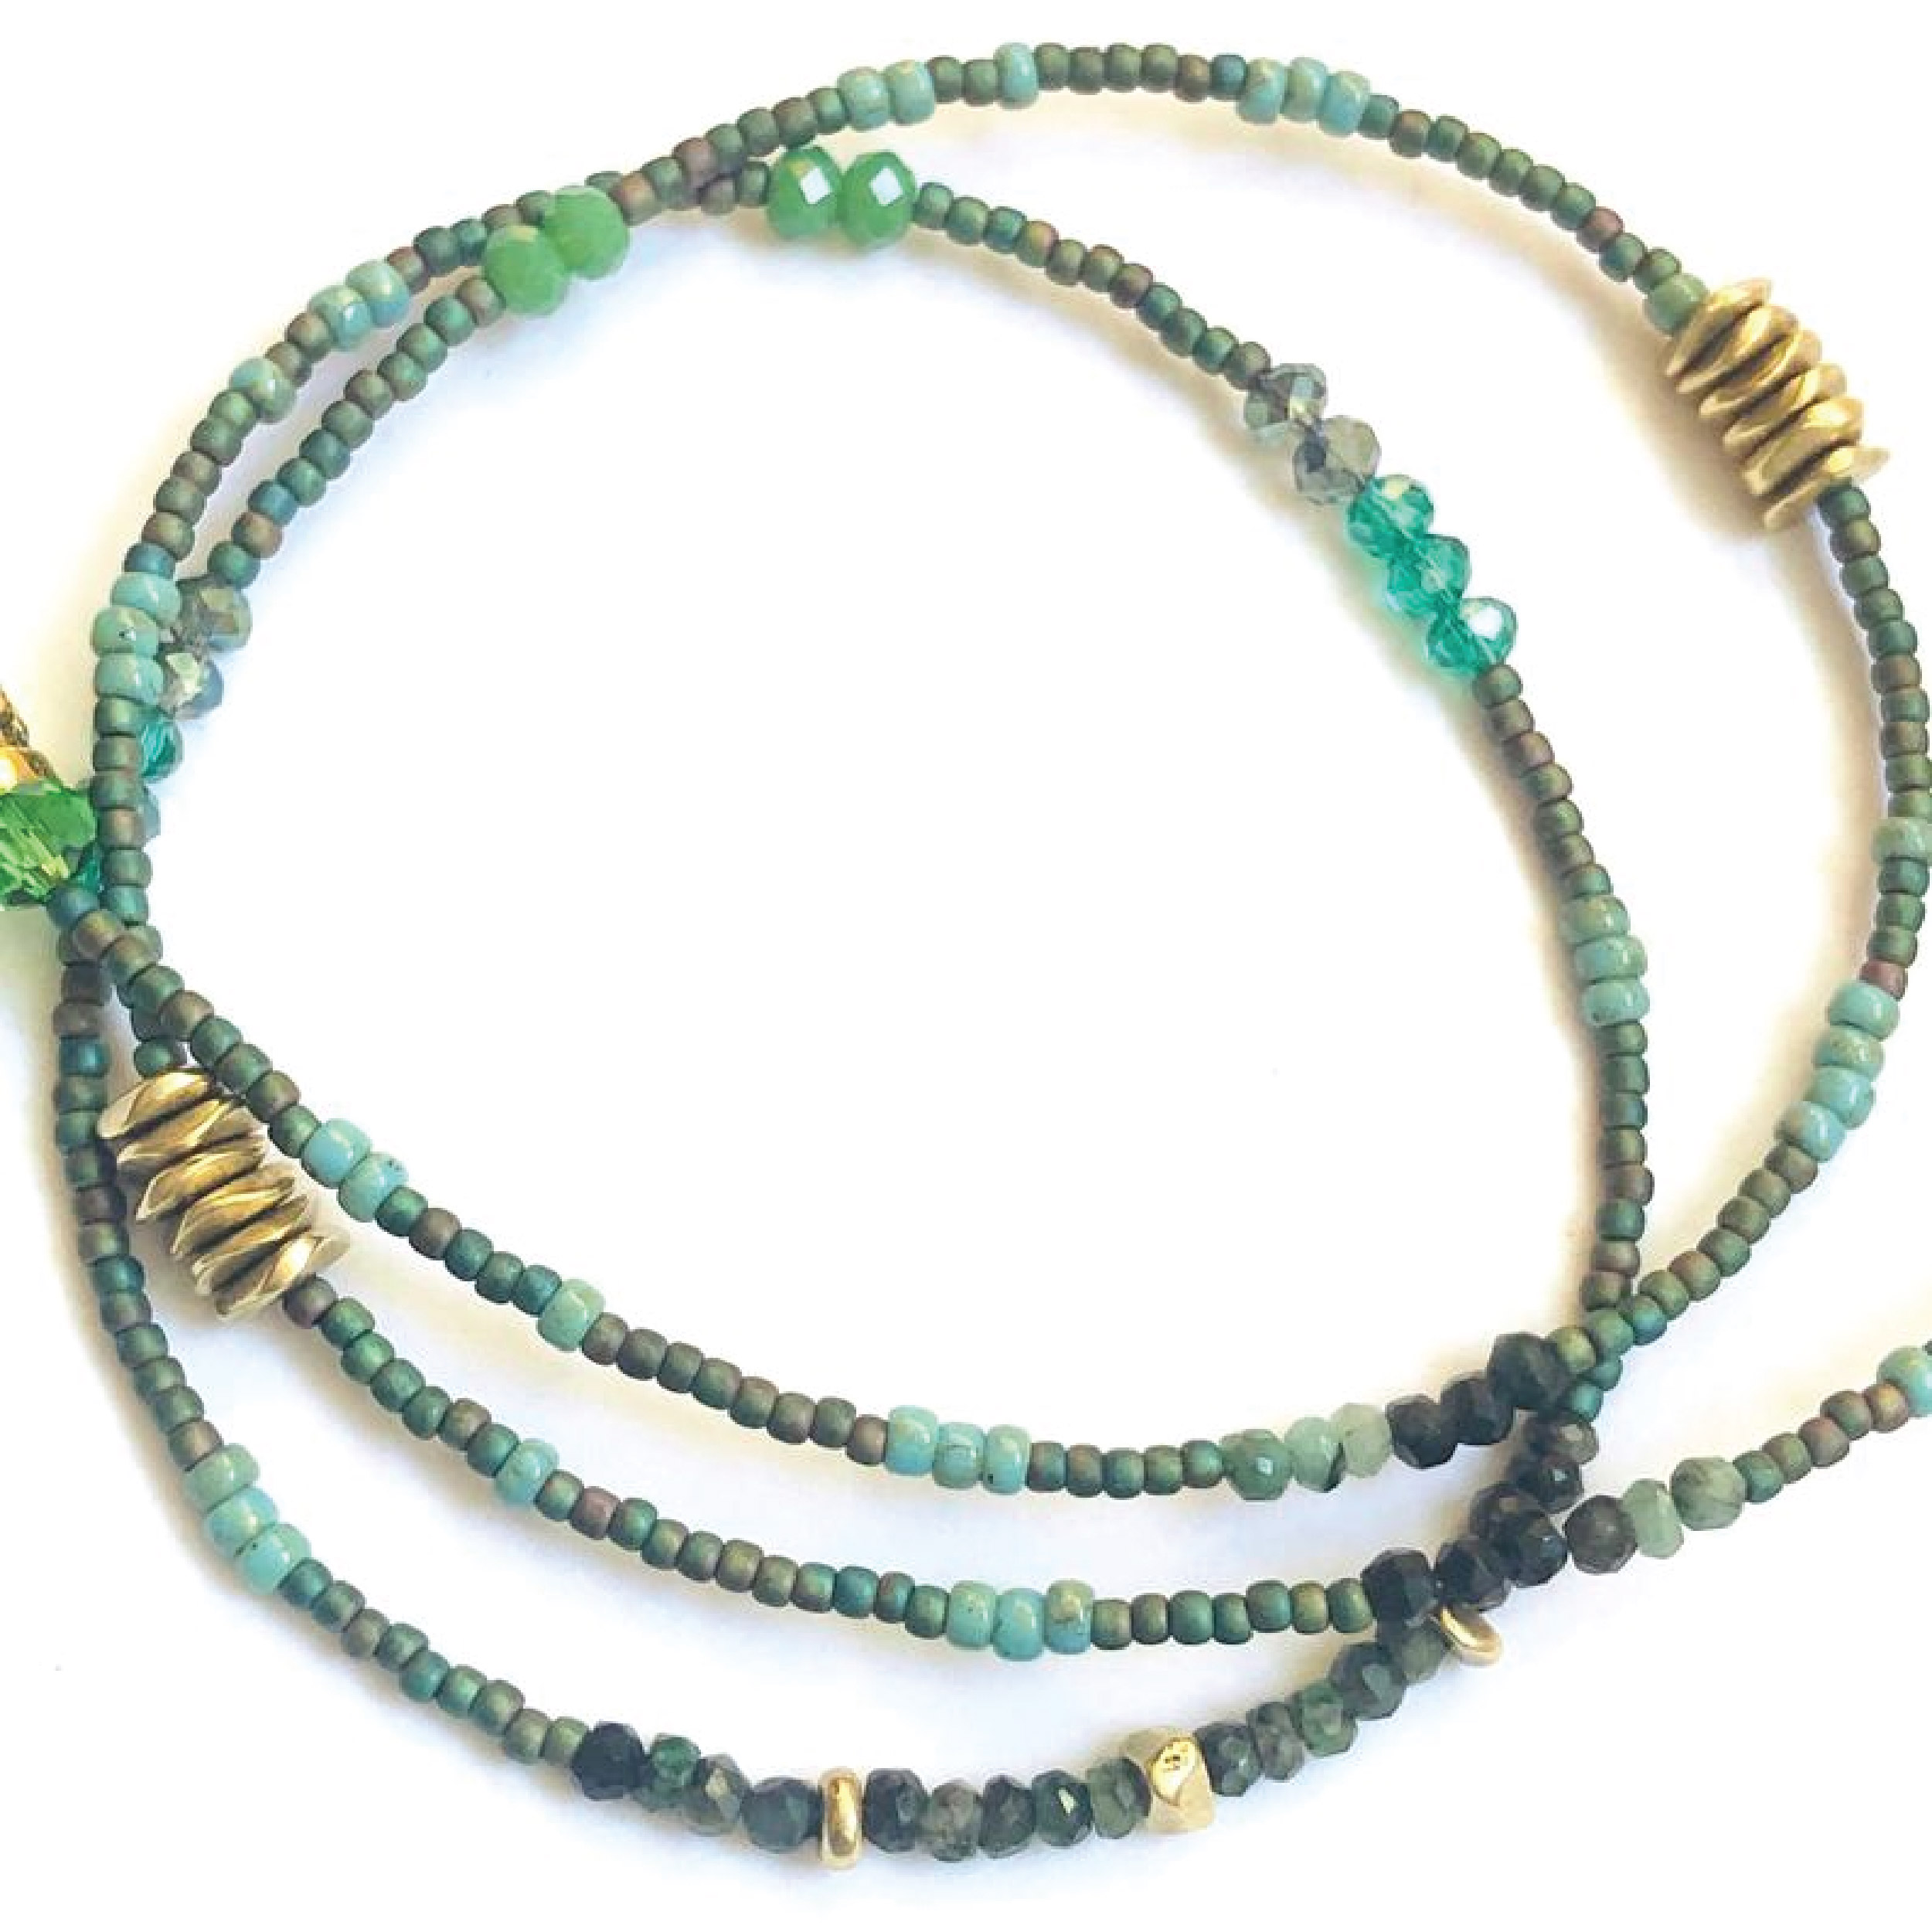 Emerald Waist Beads, Precious Gems Collection – Wrap And Soul